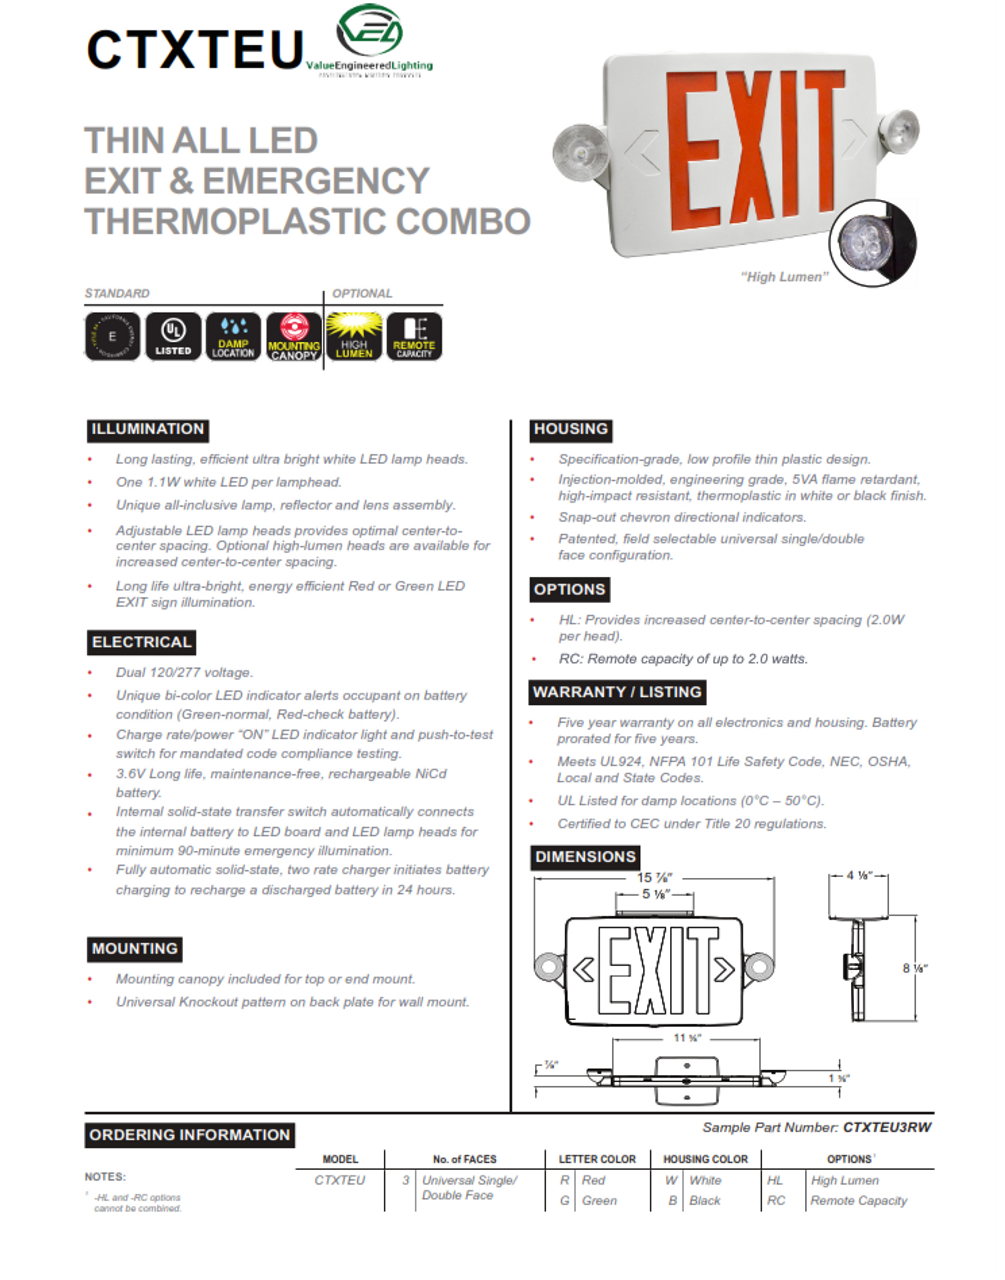 Thin All LED Exit and Emergency Thermoplastic Combo